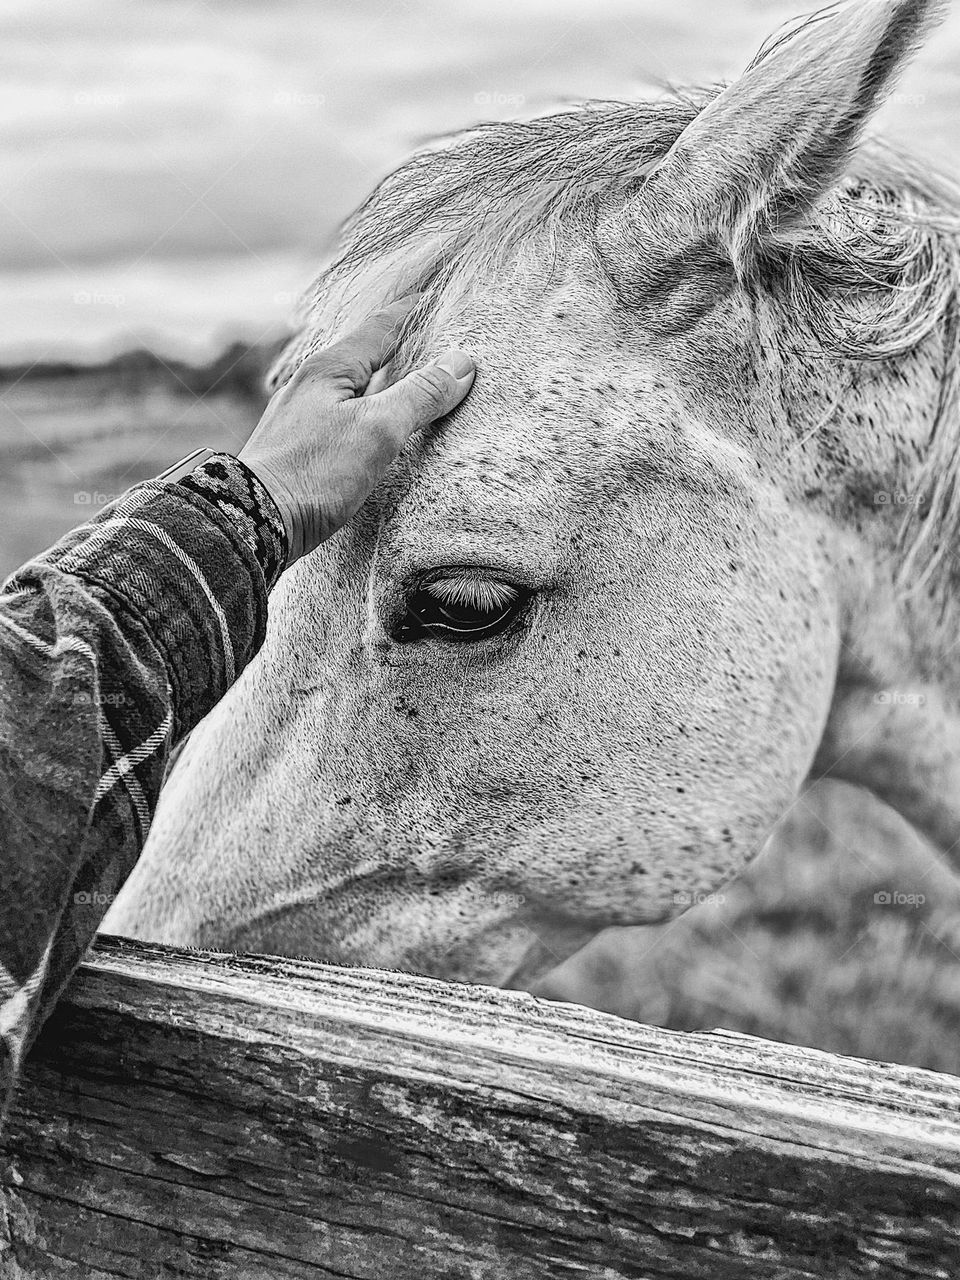 Woman gently touches horse on the head, woman’s hand reaching out for a white horse, monochrome farm photograph, life’s small quiet moments, finding peace with animals